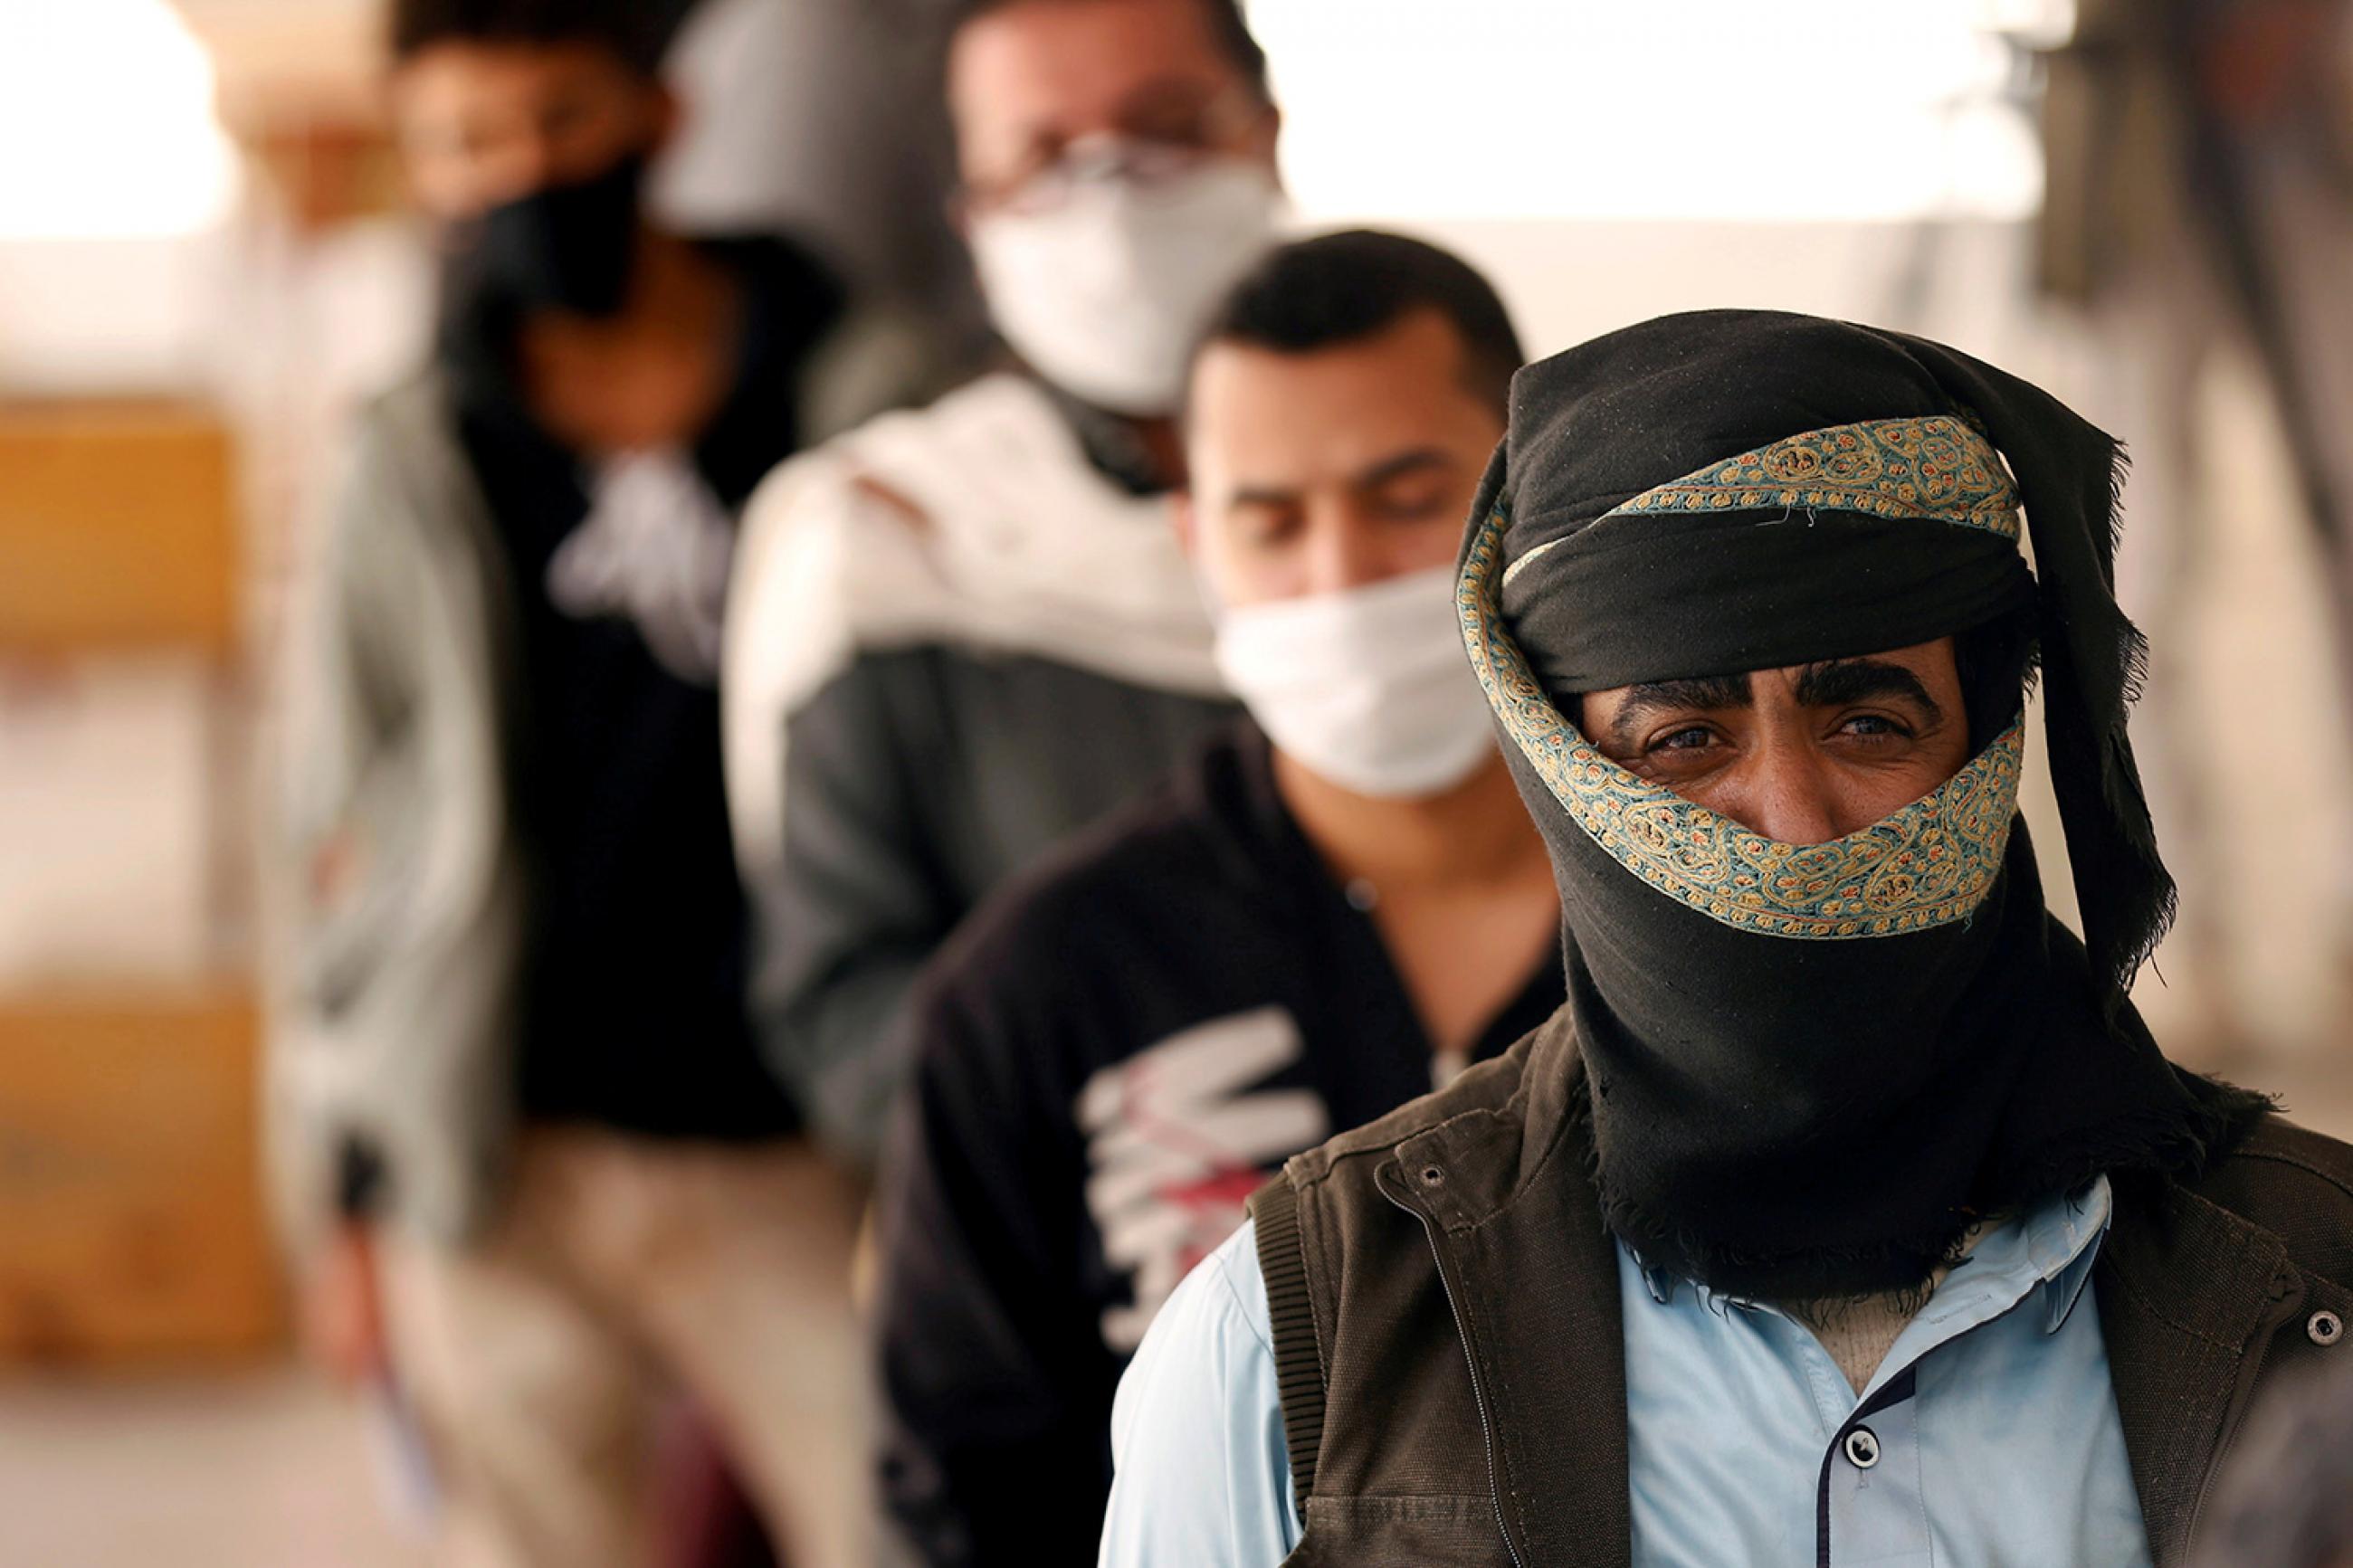 People stand in line to receive vouchers at a food distribution center supported by the World Food Program in Sanaa, Yemen, on June 3, 2020 amid the coronavirus pandemic. The photo shows several men lined up in a queue. They are all wearing facemasks. REUTERS/Khaled Abdullah